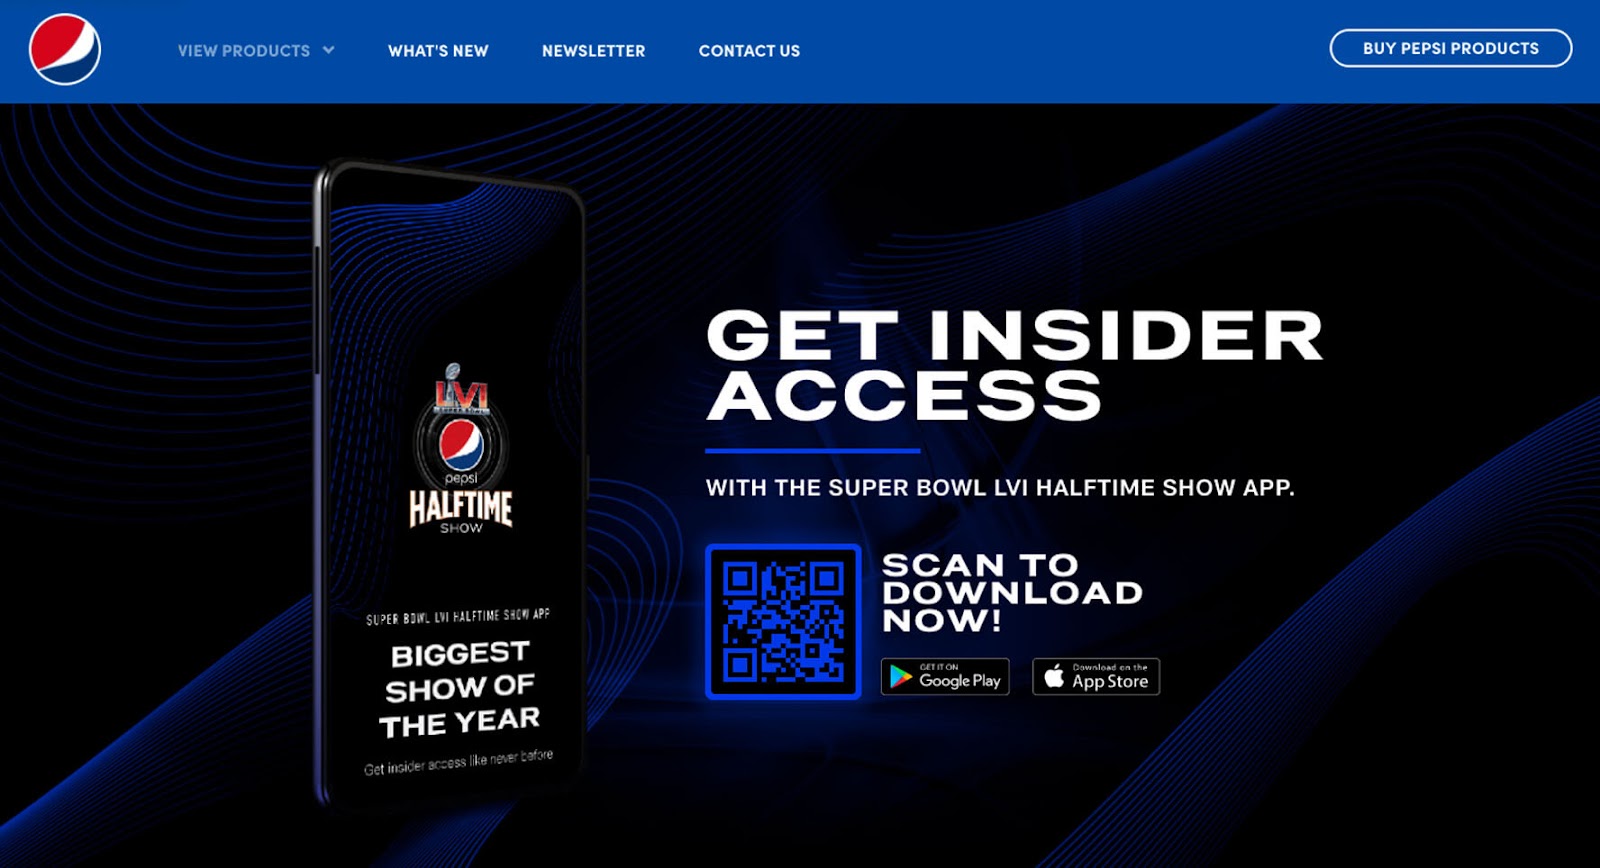 Screengrab of Pepsi's blue and black background landing page